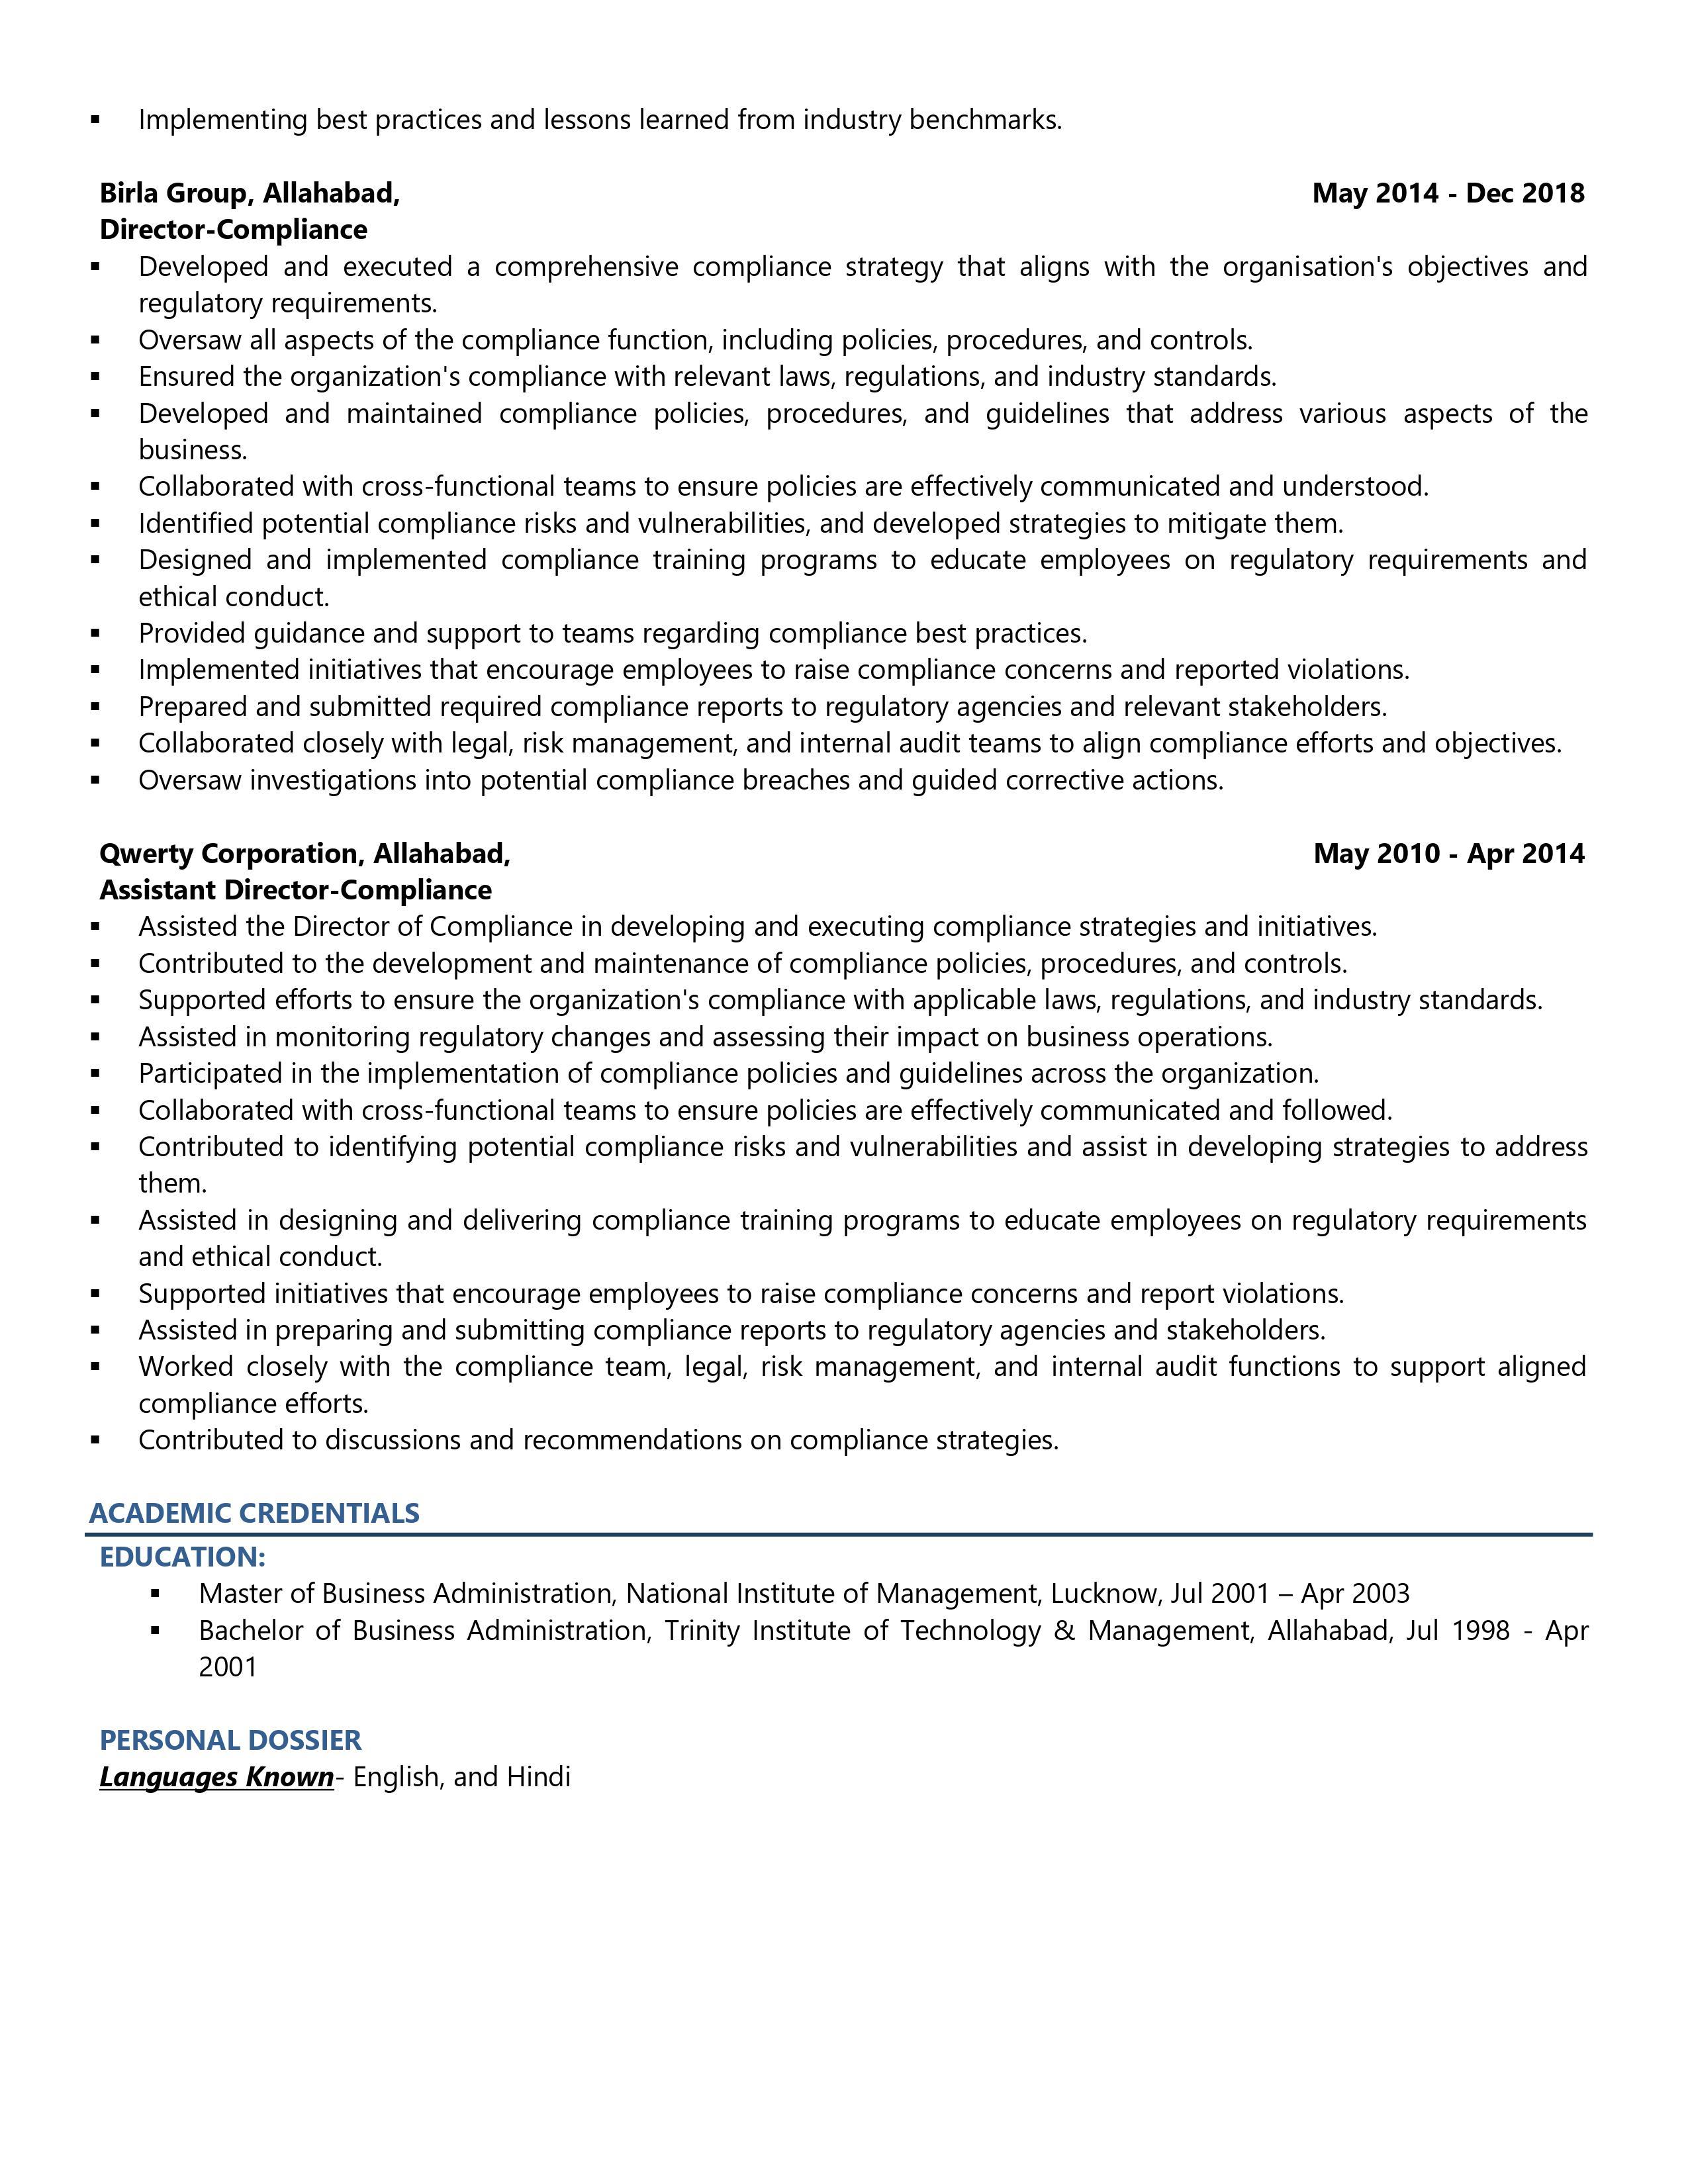 Chief Compliance Officer - Resume Example & Template